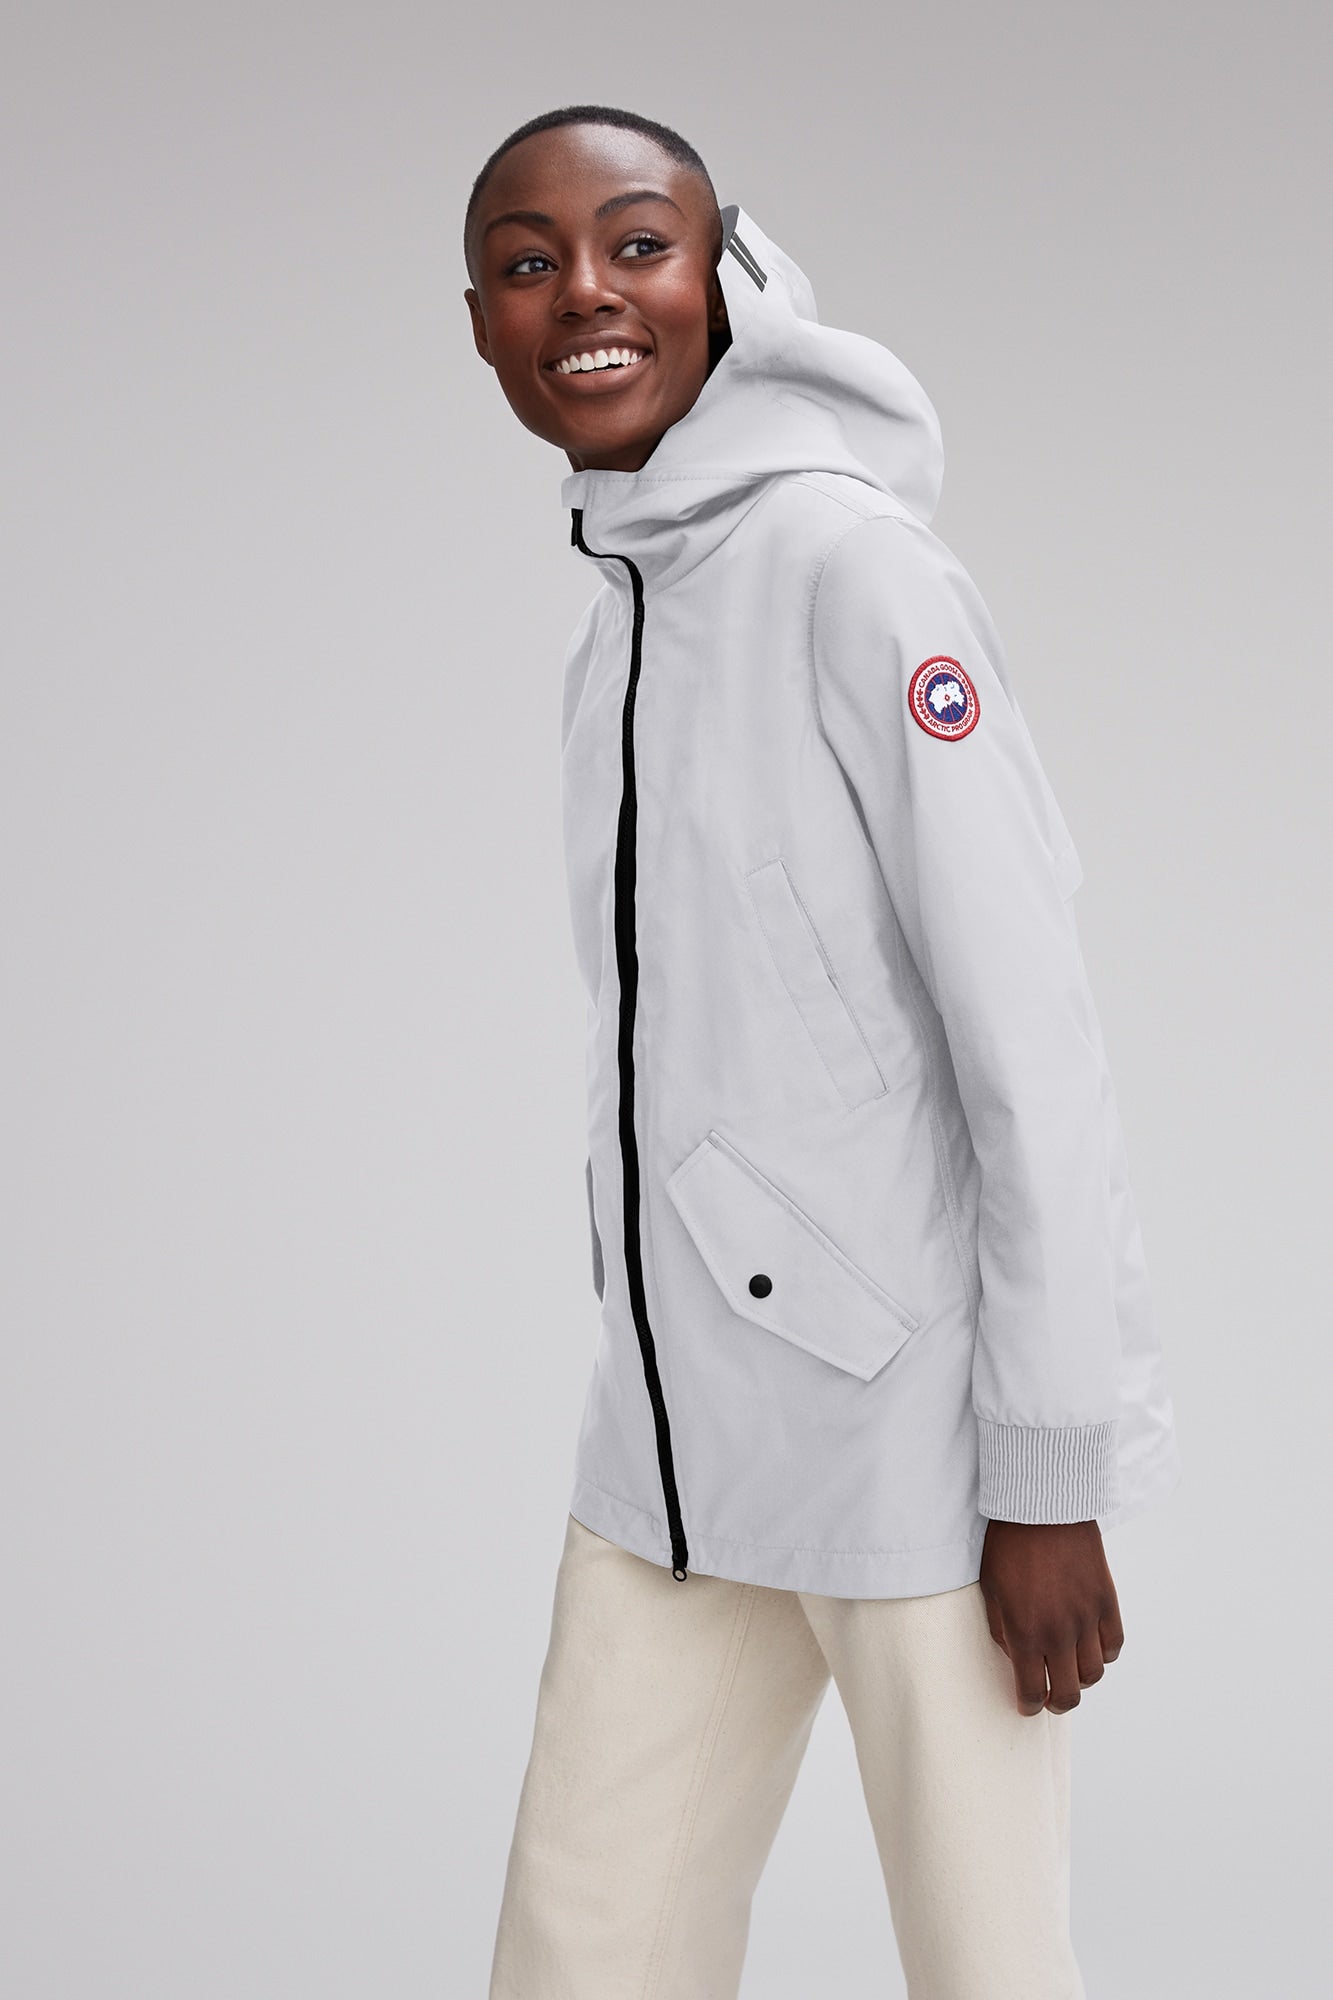 Shop Authentic Canada Goose Jackets, Parkas and more at Freeds